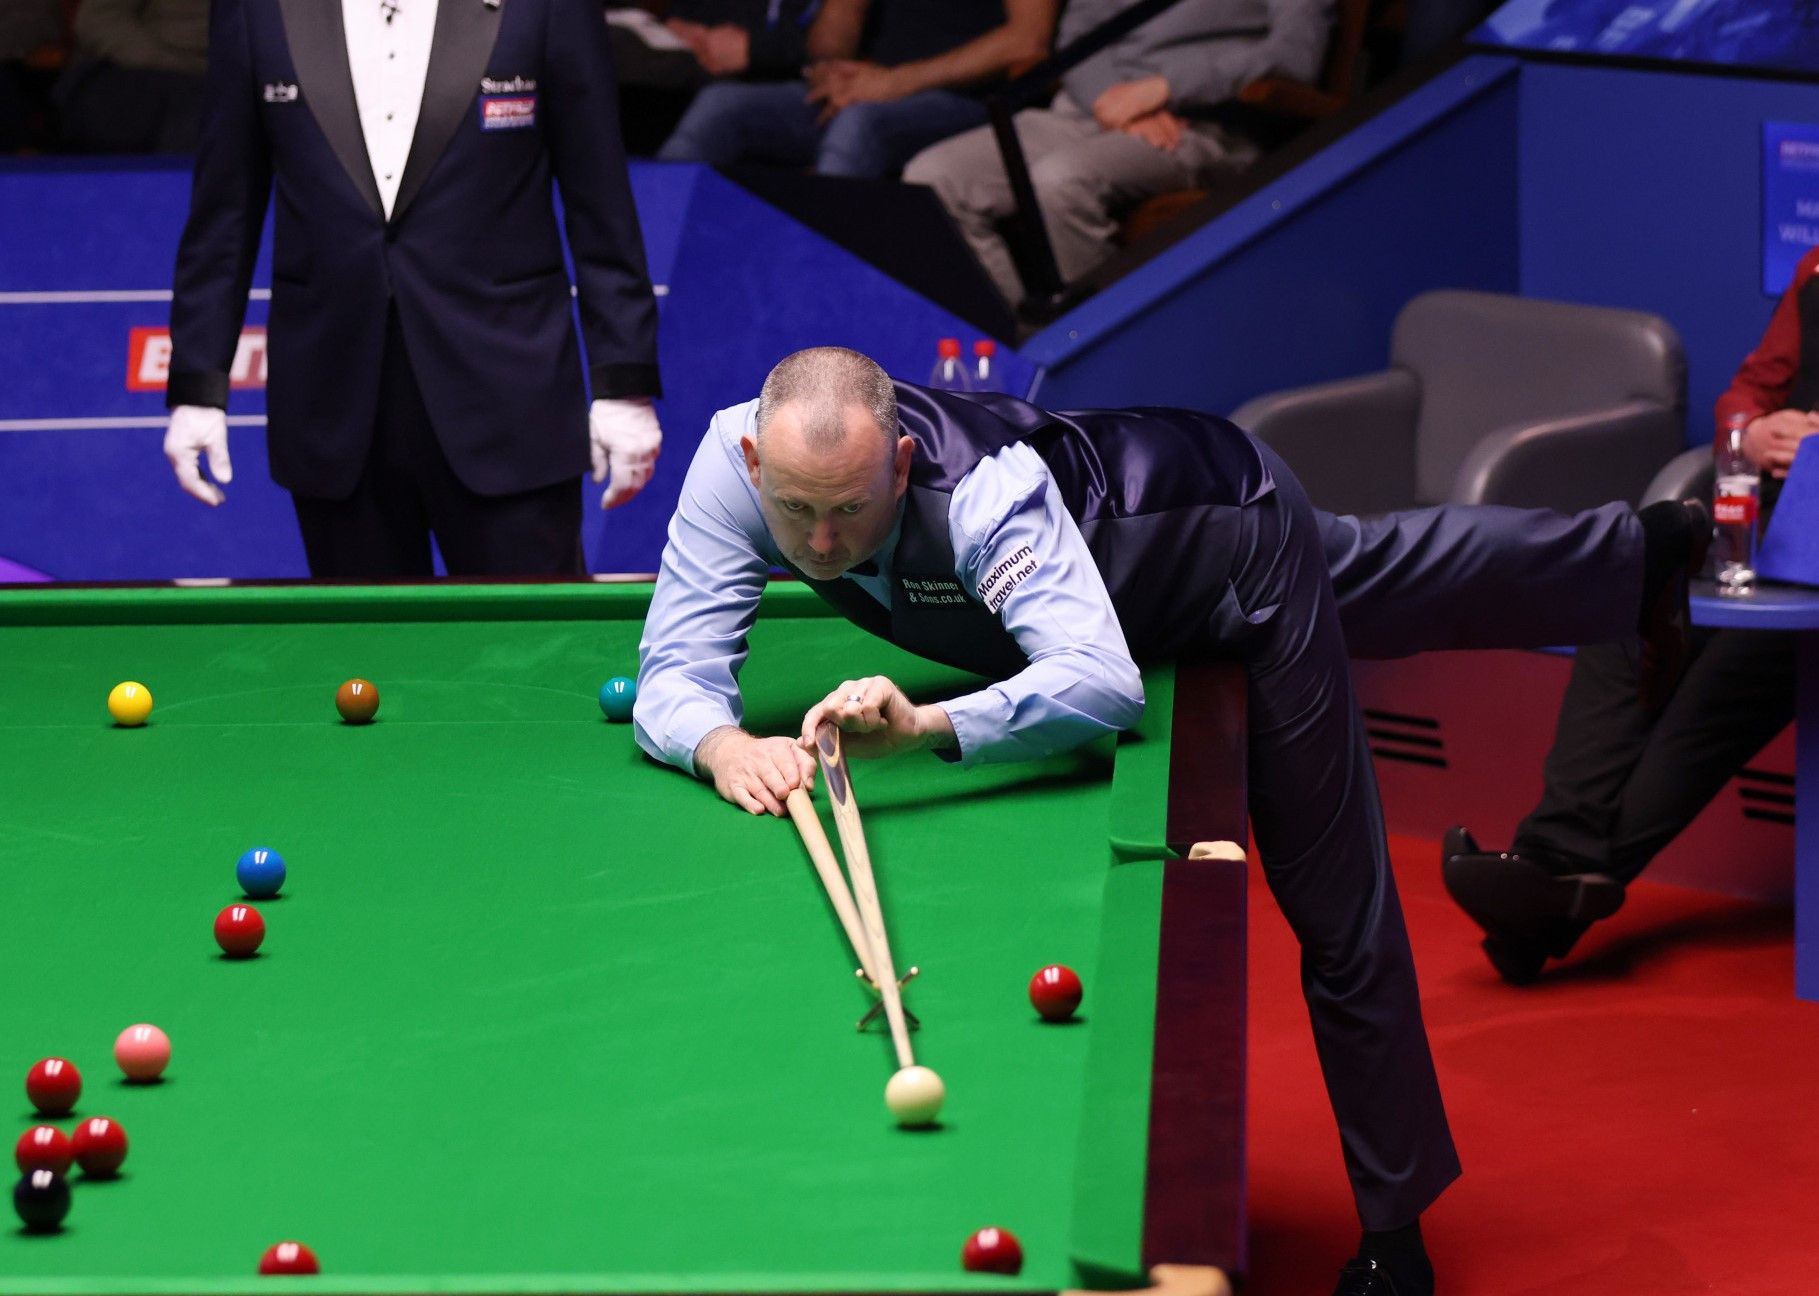 Williams fights back in World Snooker Championship semi-finals as O'Sullivan hits the front